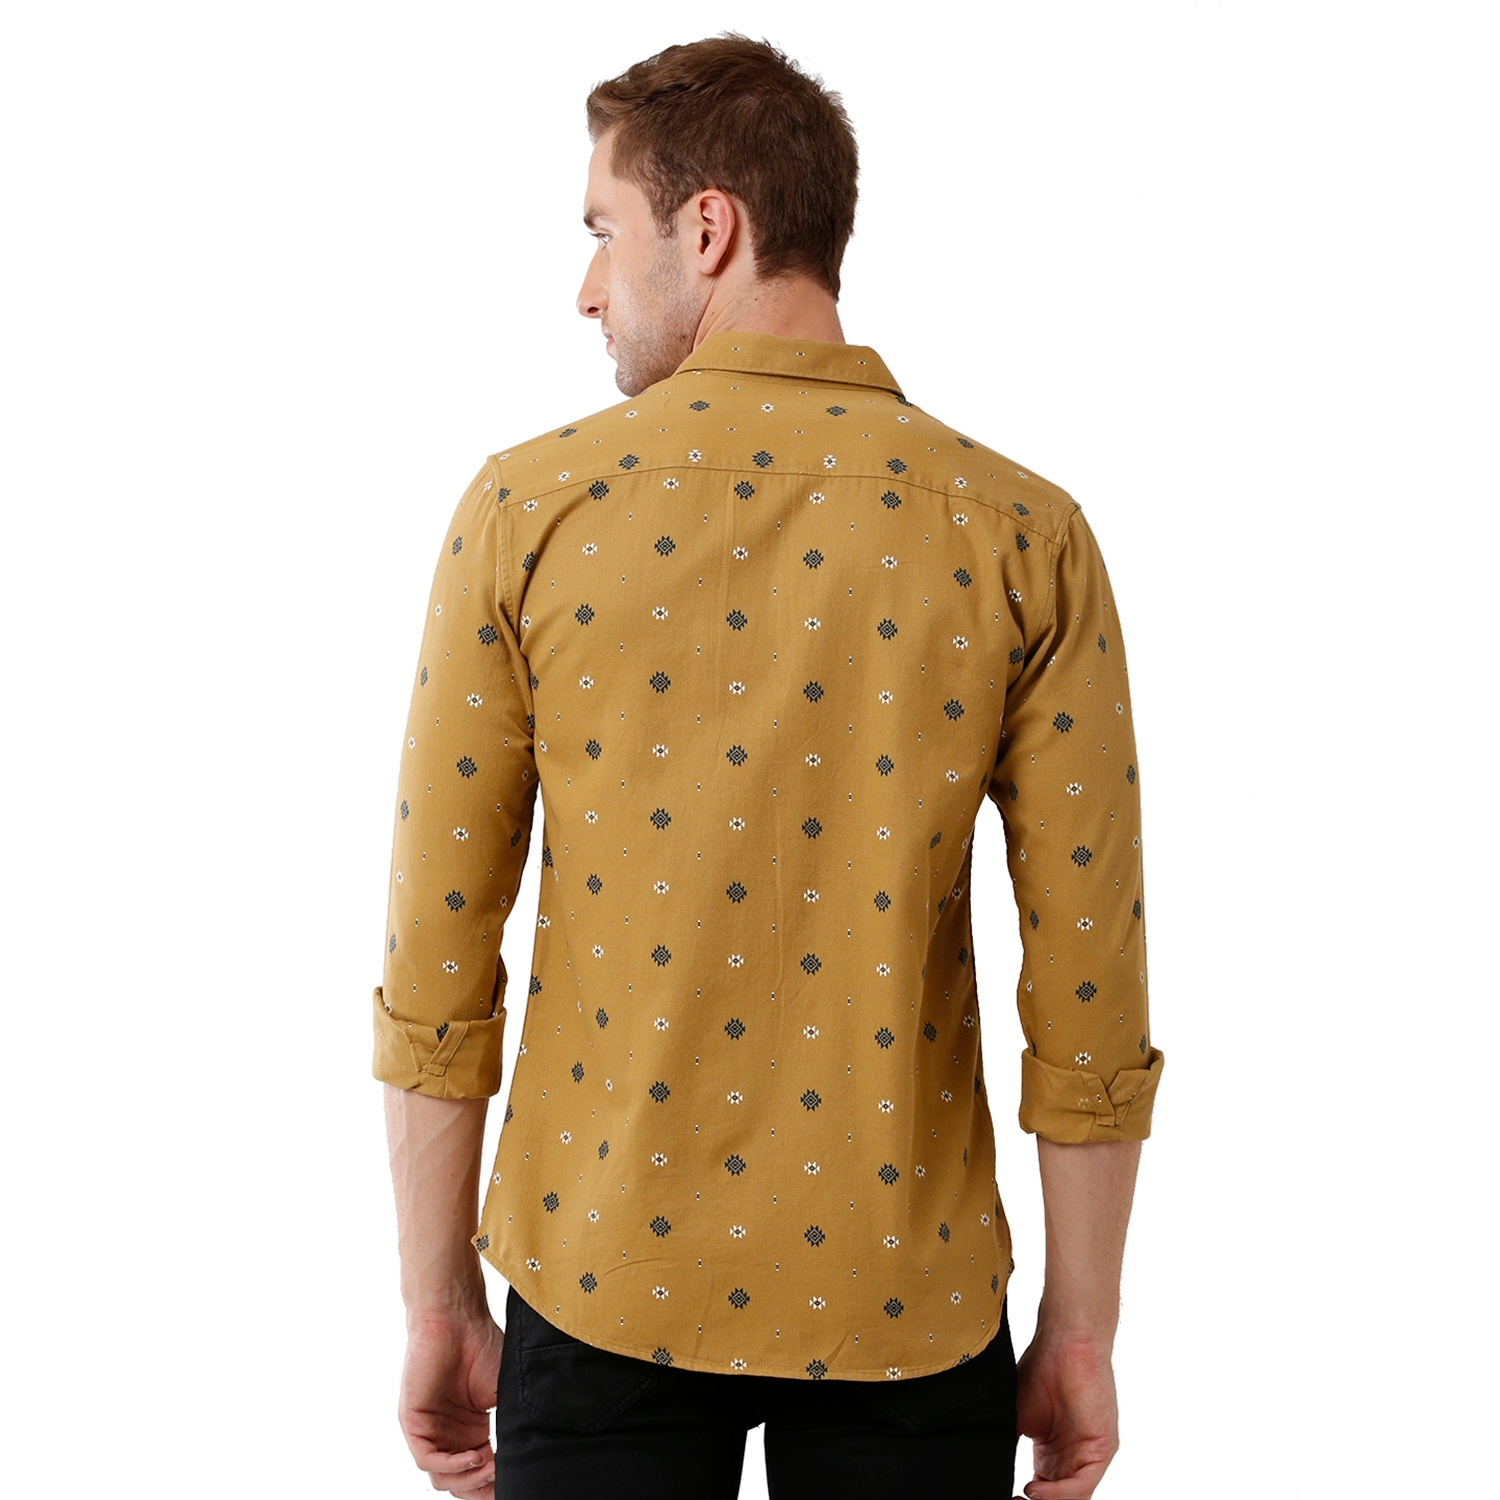 Swiss club | Swiss Club Mens 100% Cotton Printed Full Sleeve Slim Fit Polo Neck Yellow Color Woven Shirt (S-SC-124 A-FS-PRT-BSL) 2